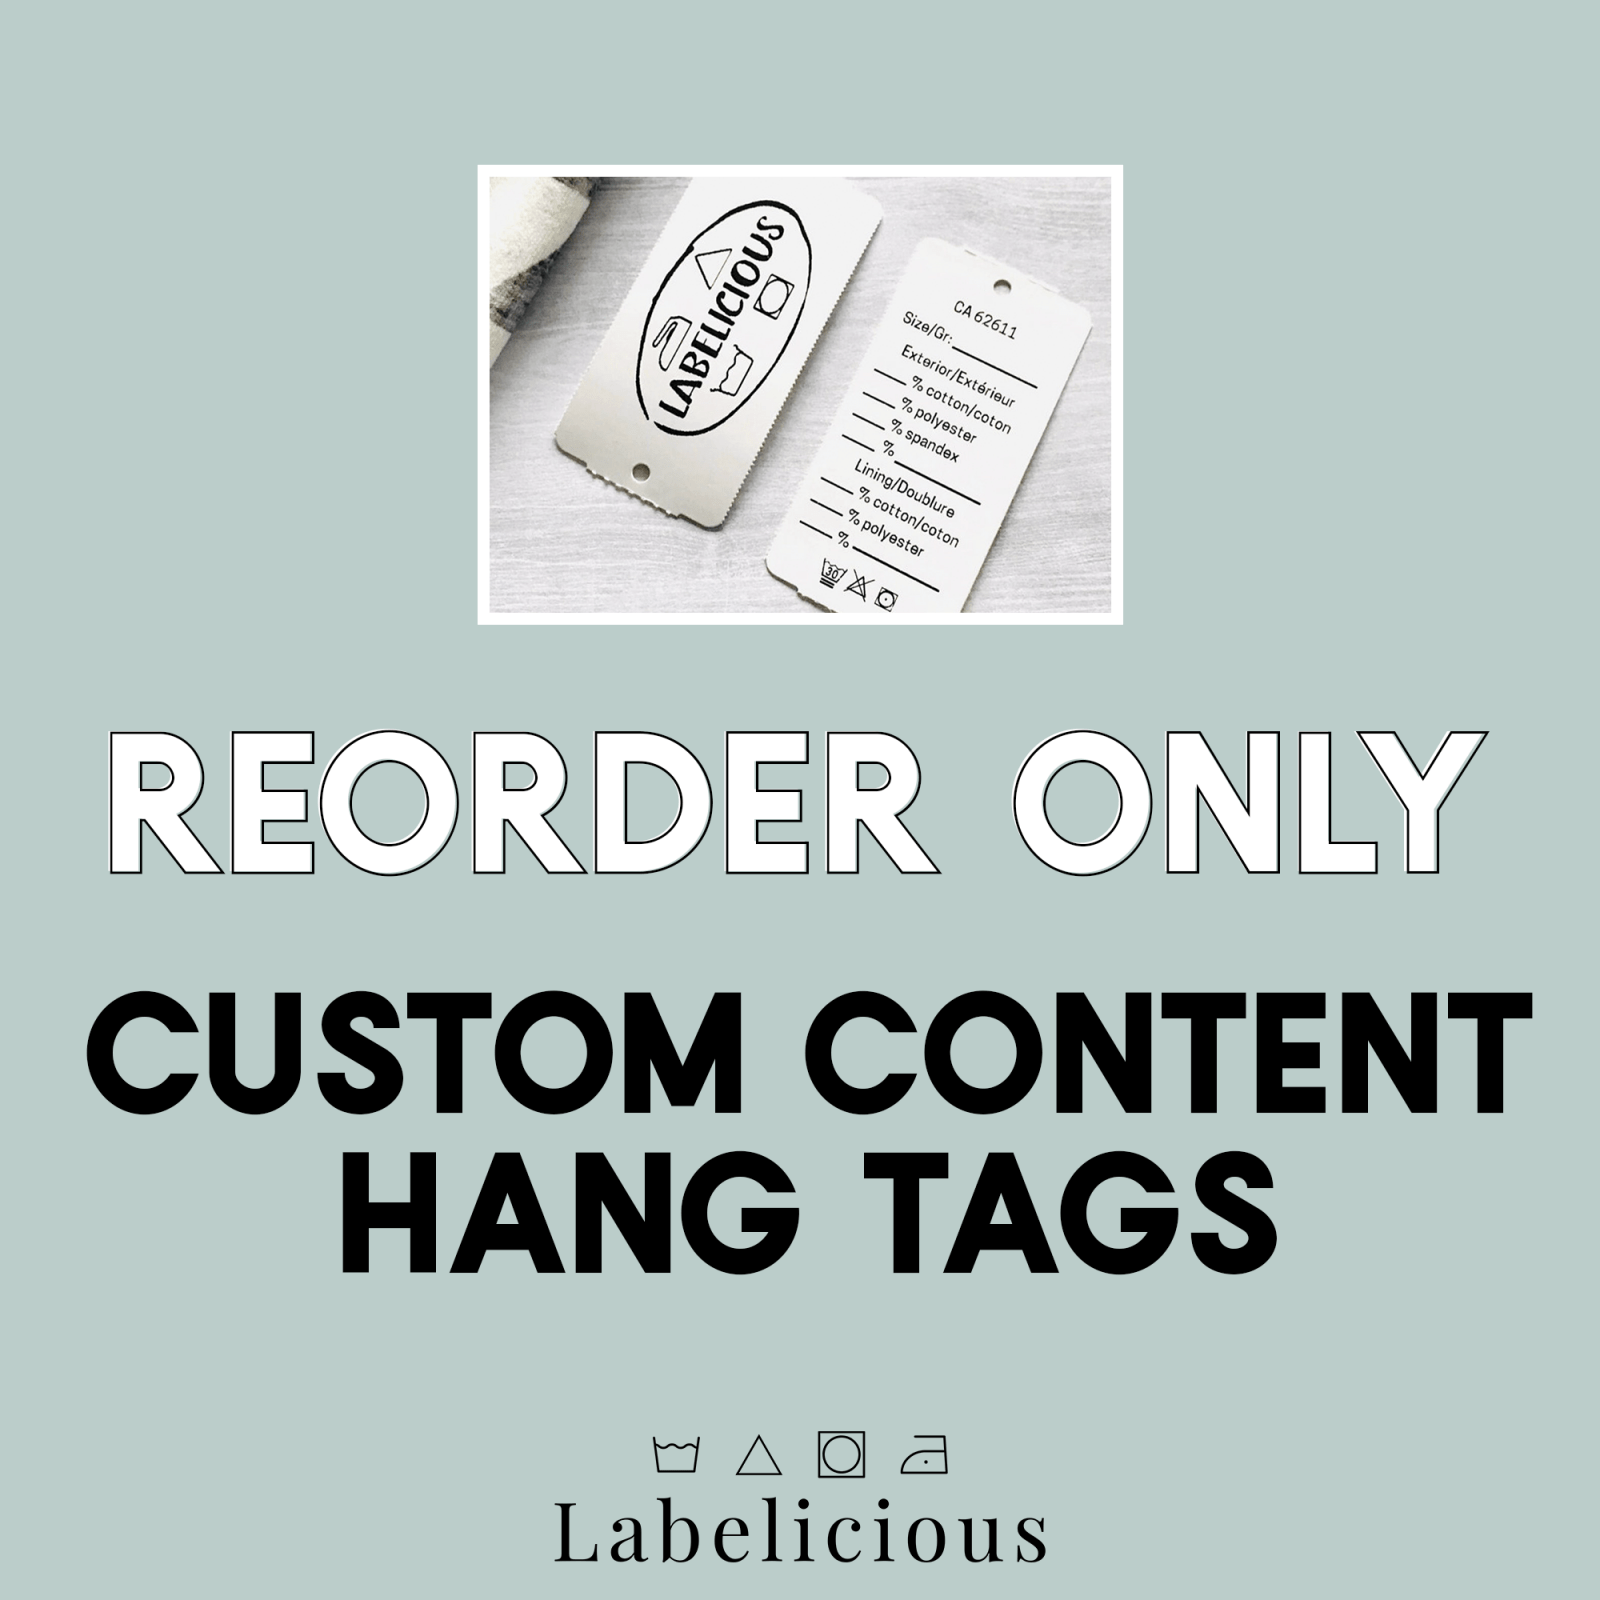 re-order-only-content-hang-tags-407475.png